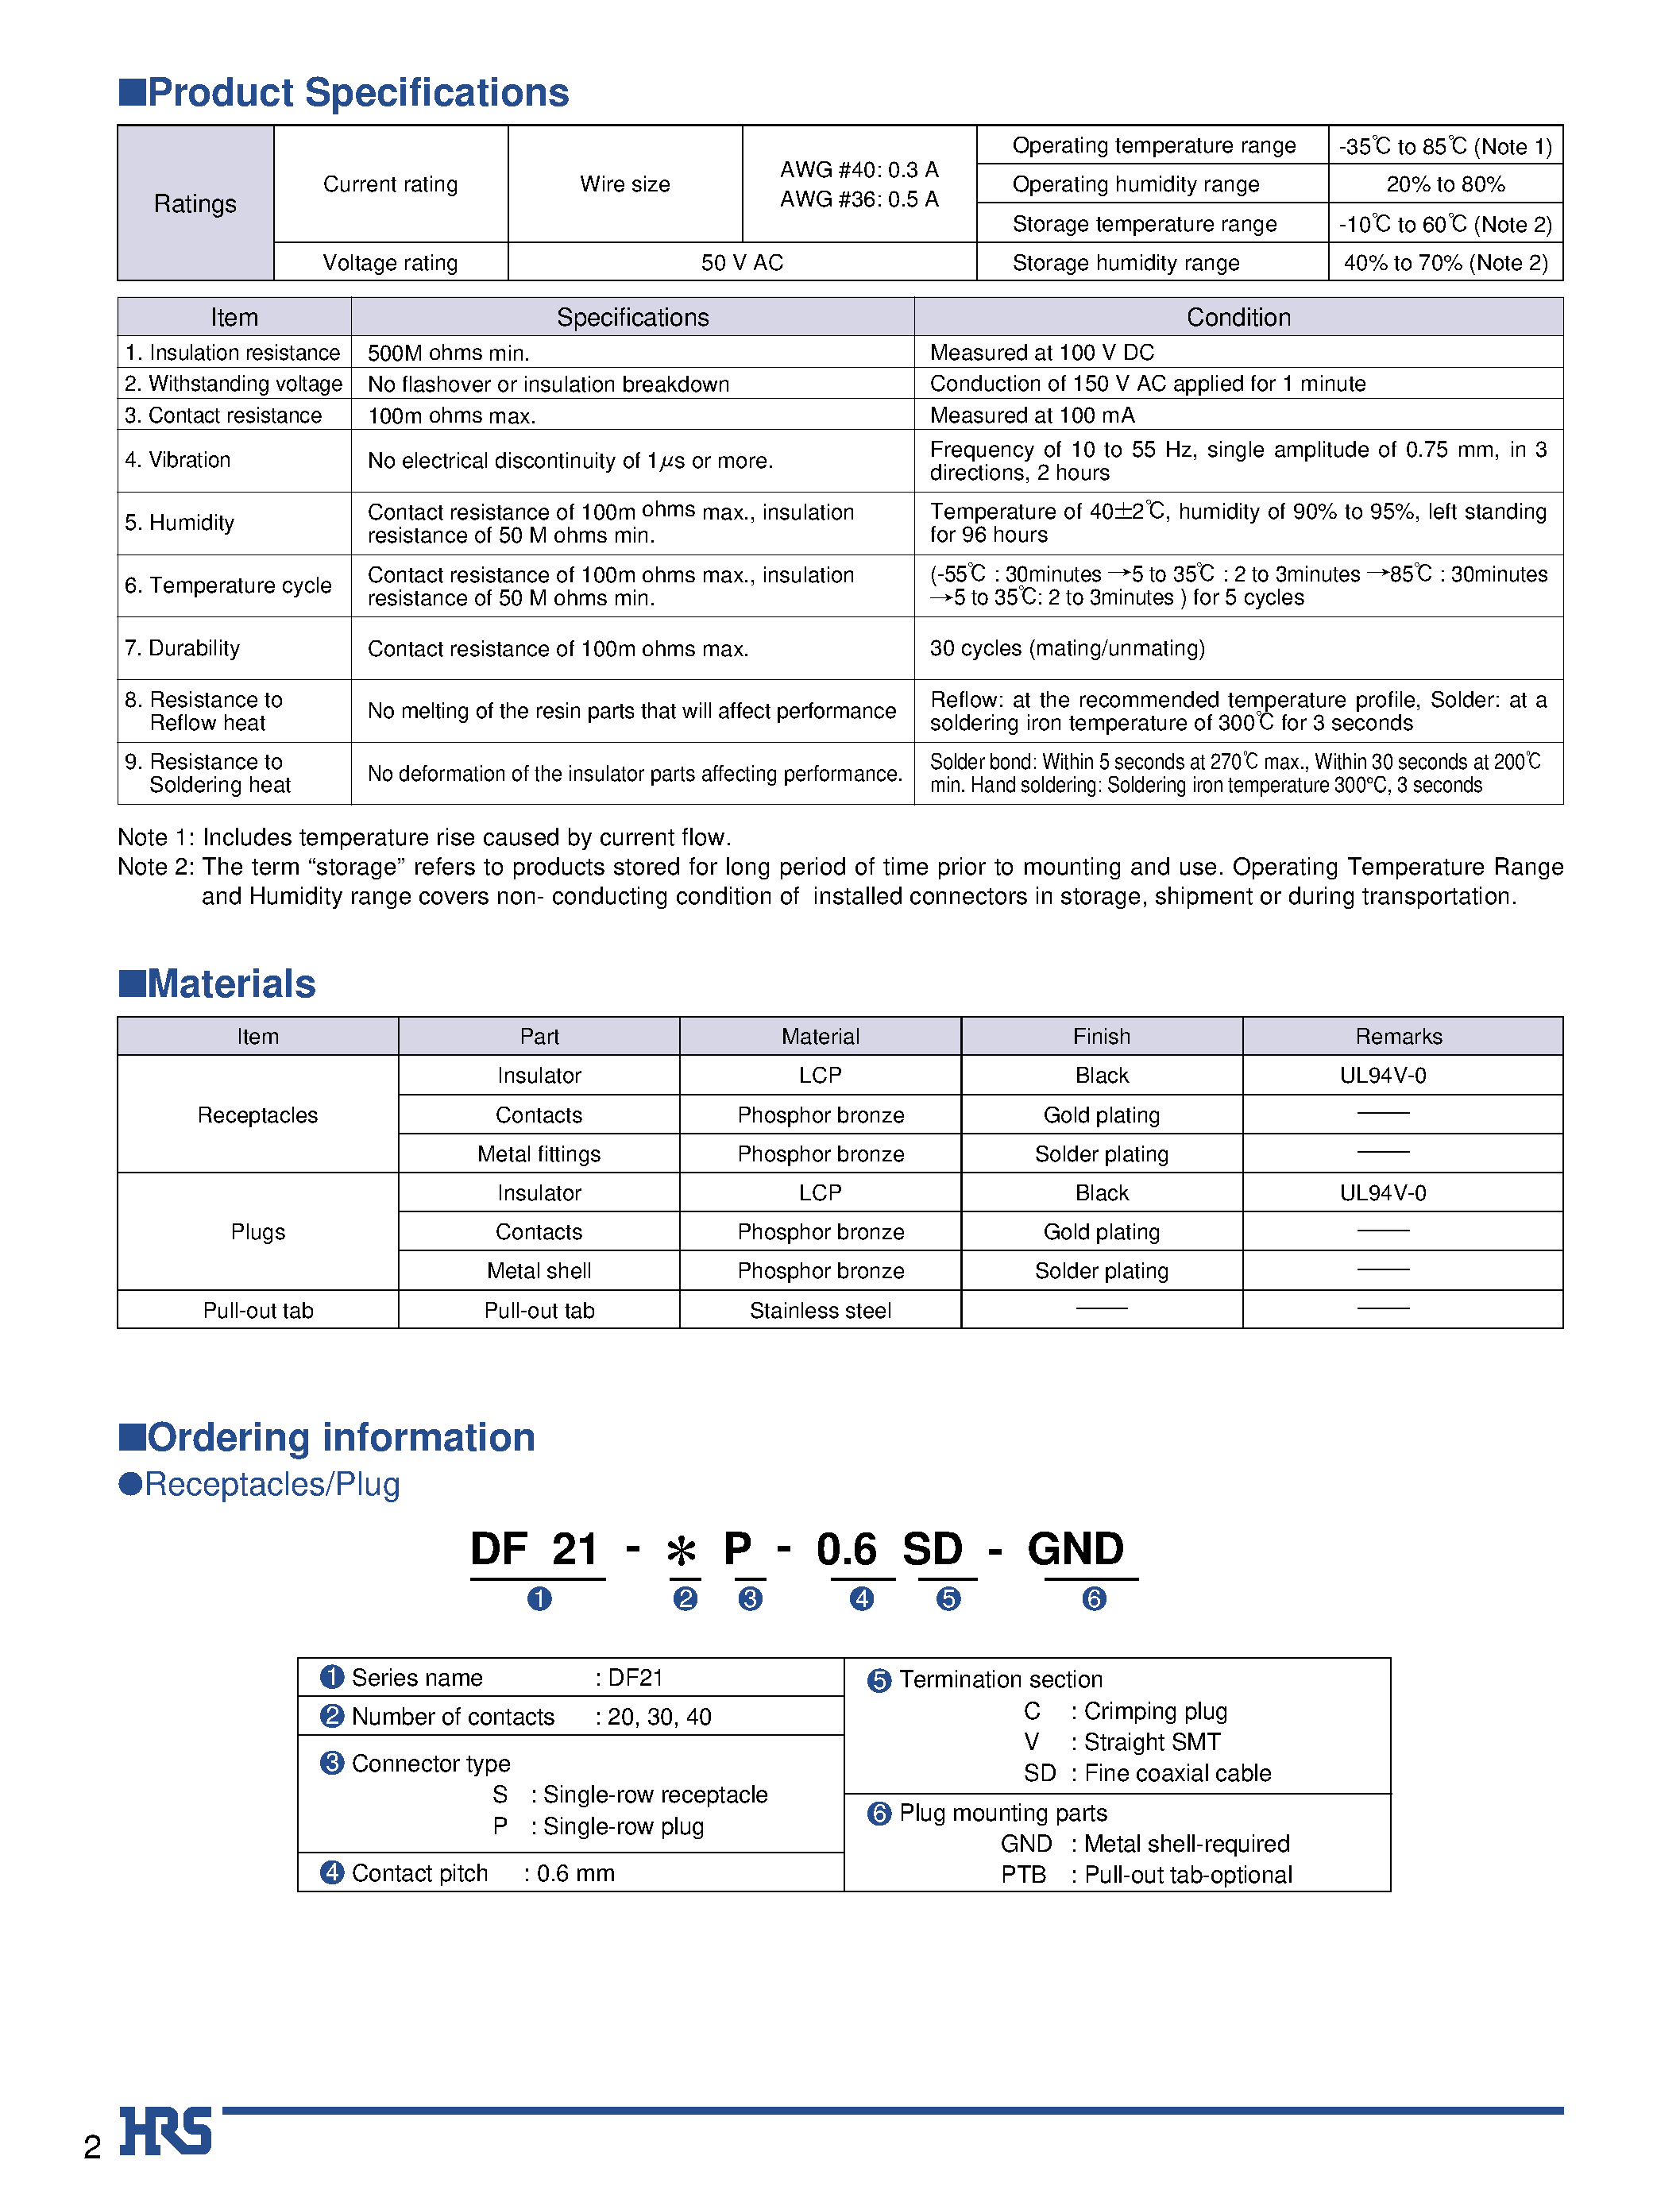 Datasheet DF21-30P-0.6SD-GND - 0.6mm Pitch Board-to-Fine-Coaxial Cable Connectors page 2